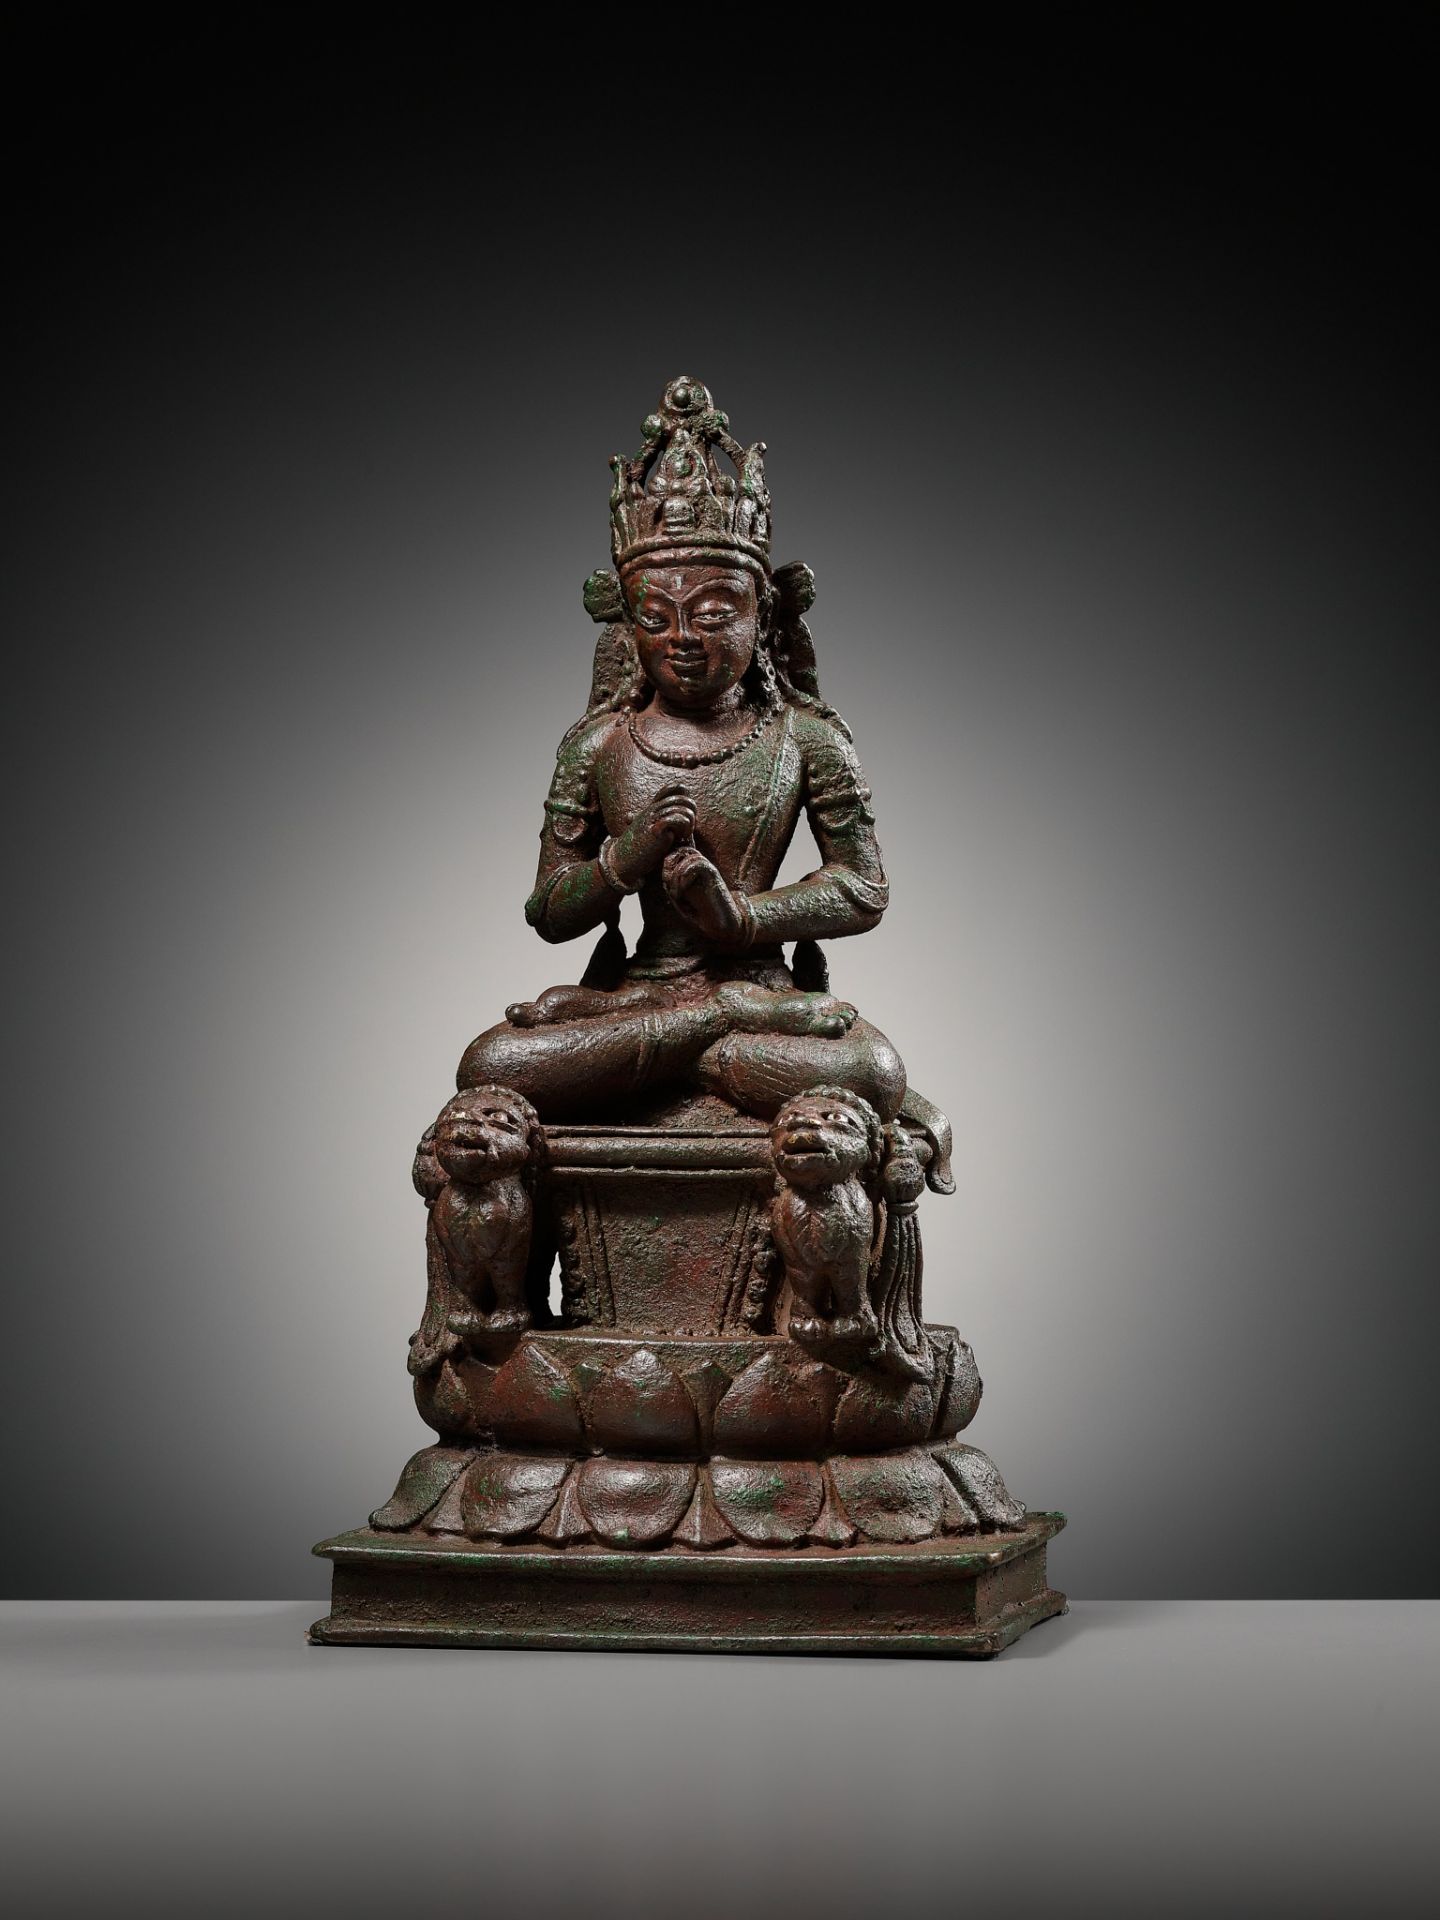 A SILVER-INLAID BRONZE FIGURE OF BUDDHA VAIROCANA, SWAT-VALLEY, 7TH-8TH CENTURY - Image 7 of 17